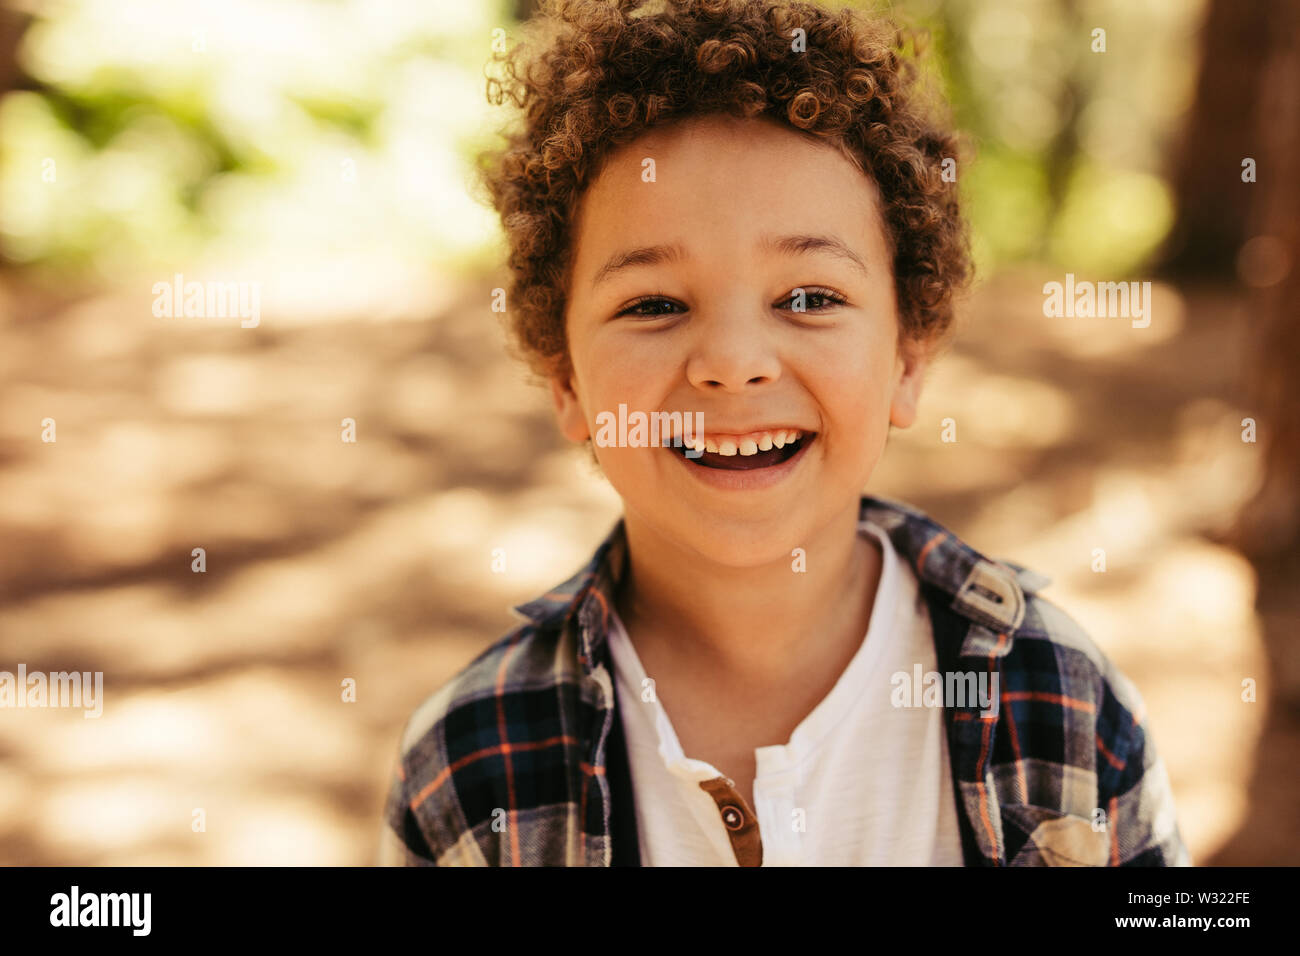 Close up portrait of cute boy smiling outdoors. Kid looking at camera et rire. Banque D'Images